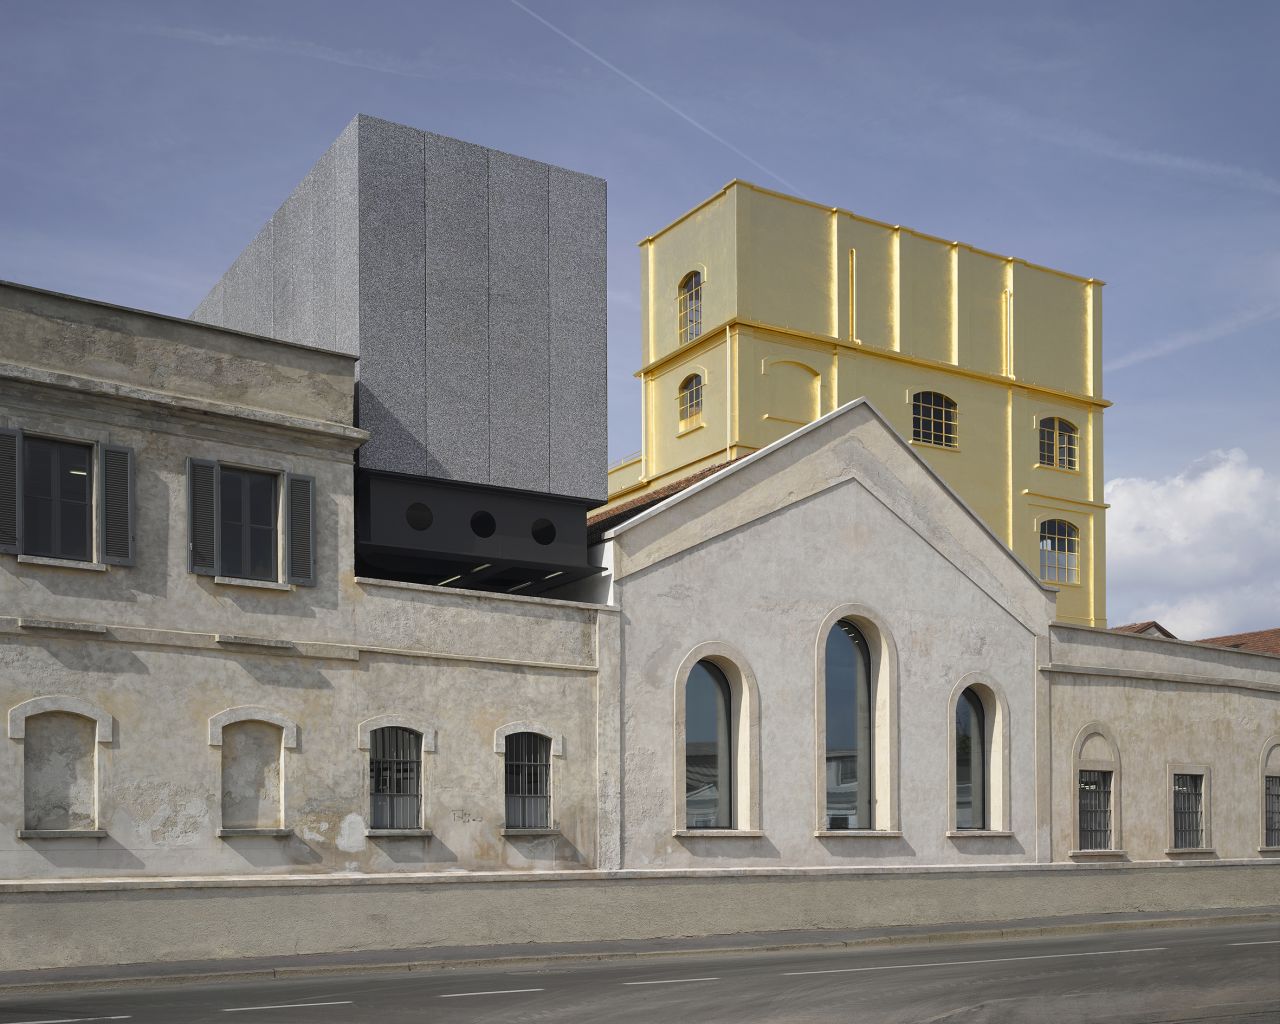 Fondazione Prada, which opened on May 9, was designed by Rem Koolhaas's architecture firm OMA. 